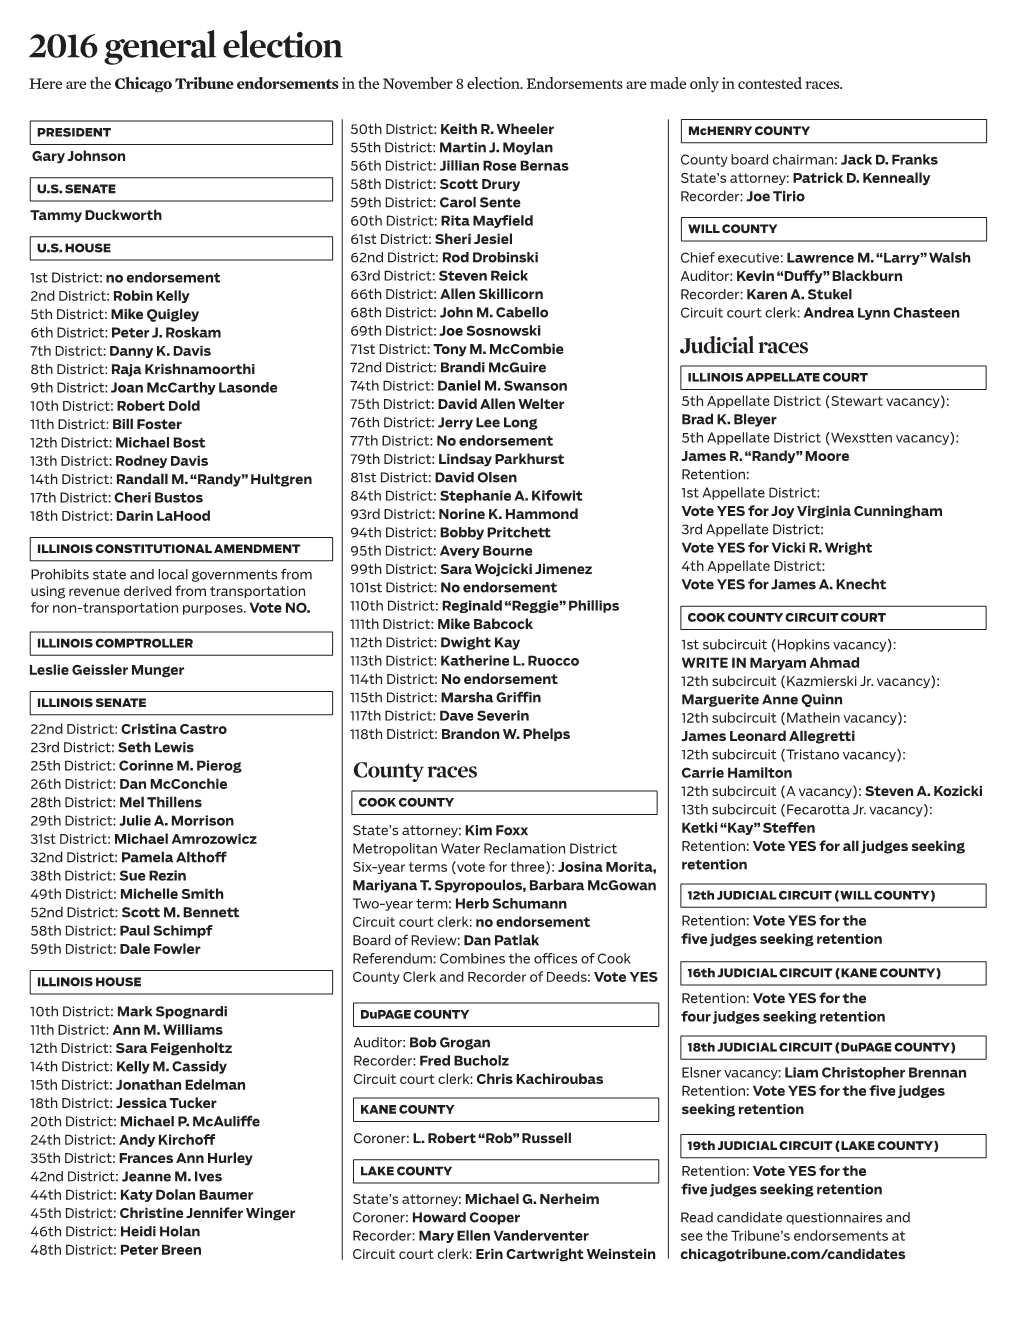 2016 General Election Here Are the Chicago Tribune Endorsements in the November 8 Election